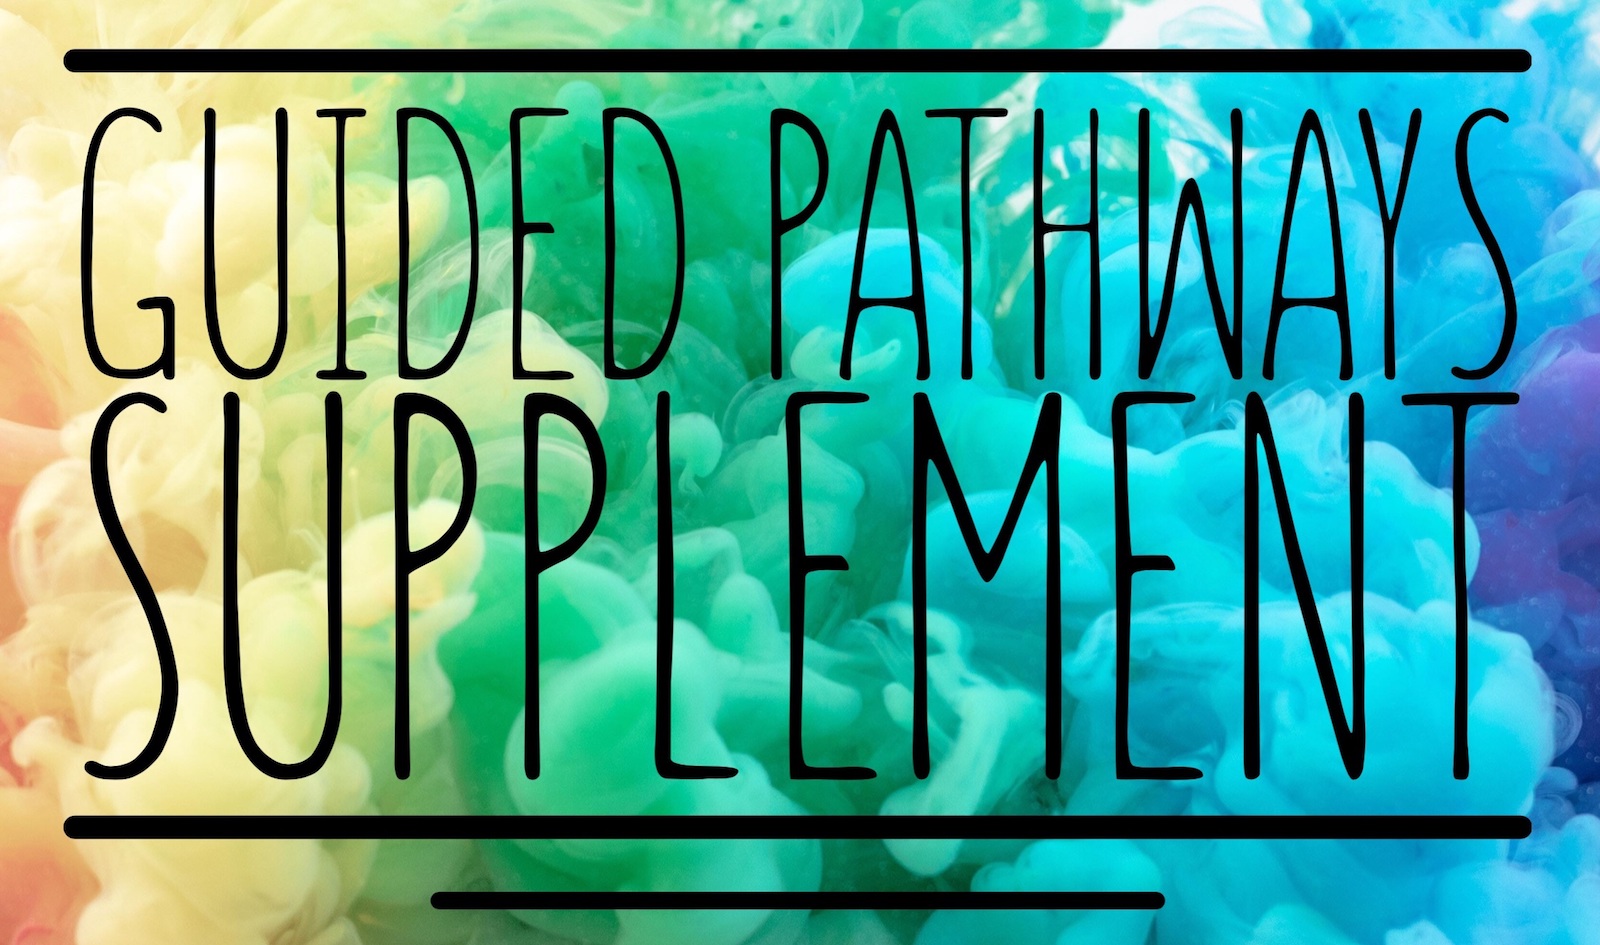 Guided Pathways Supplement